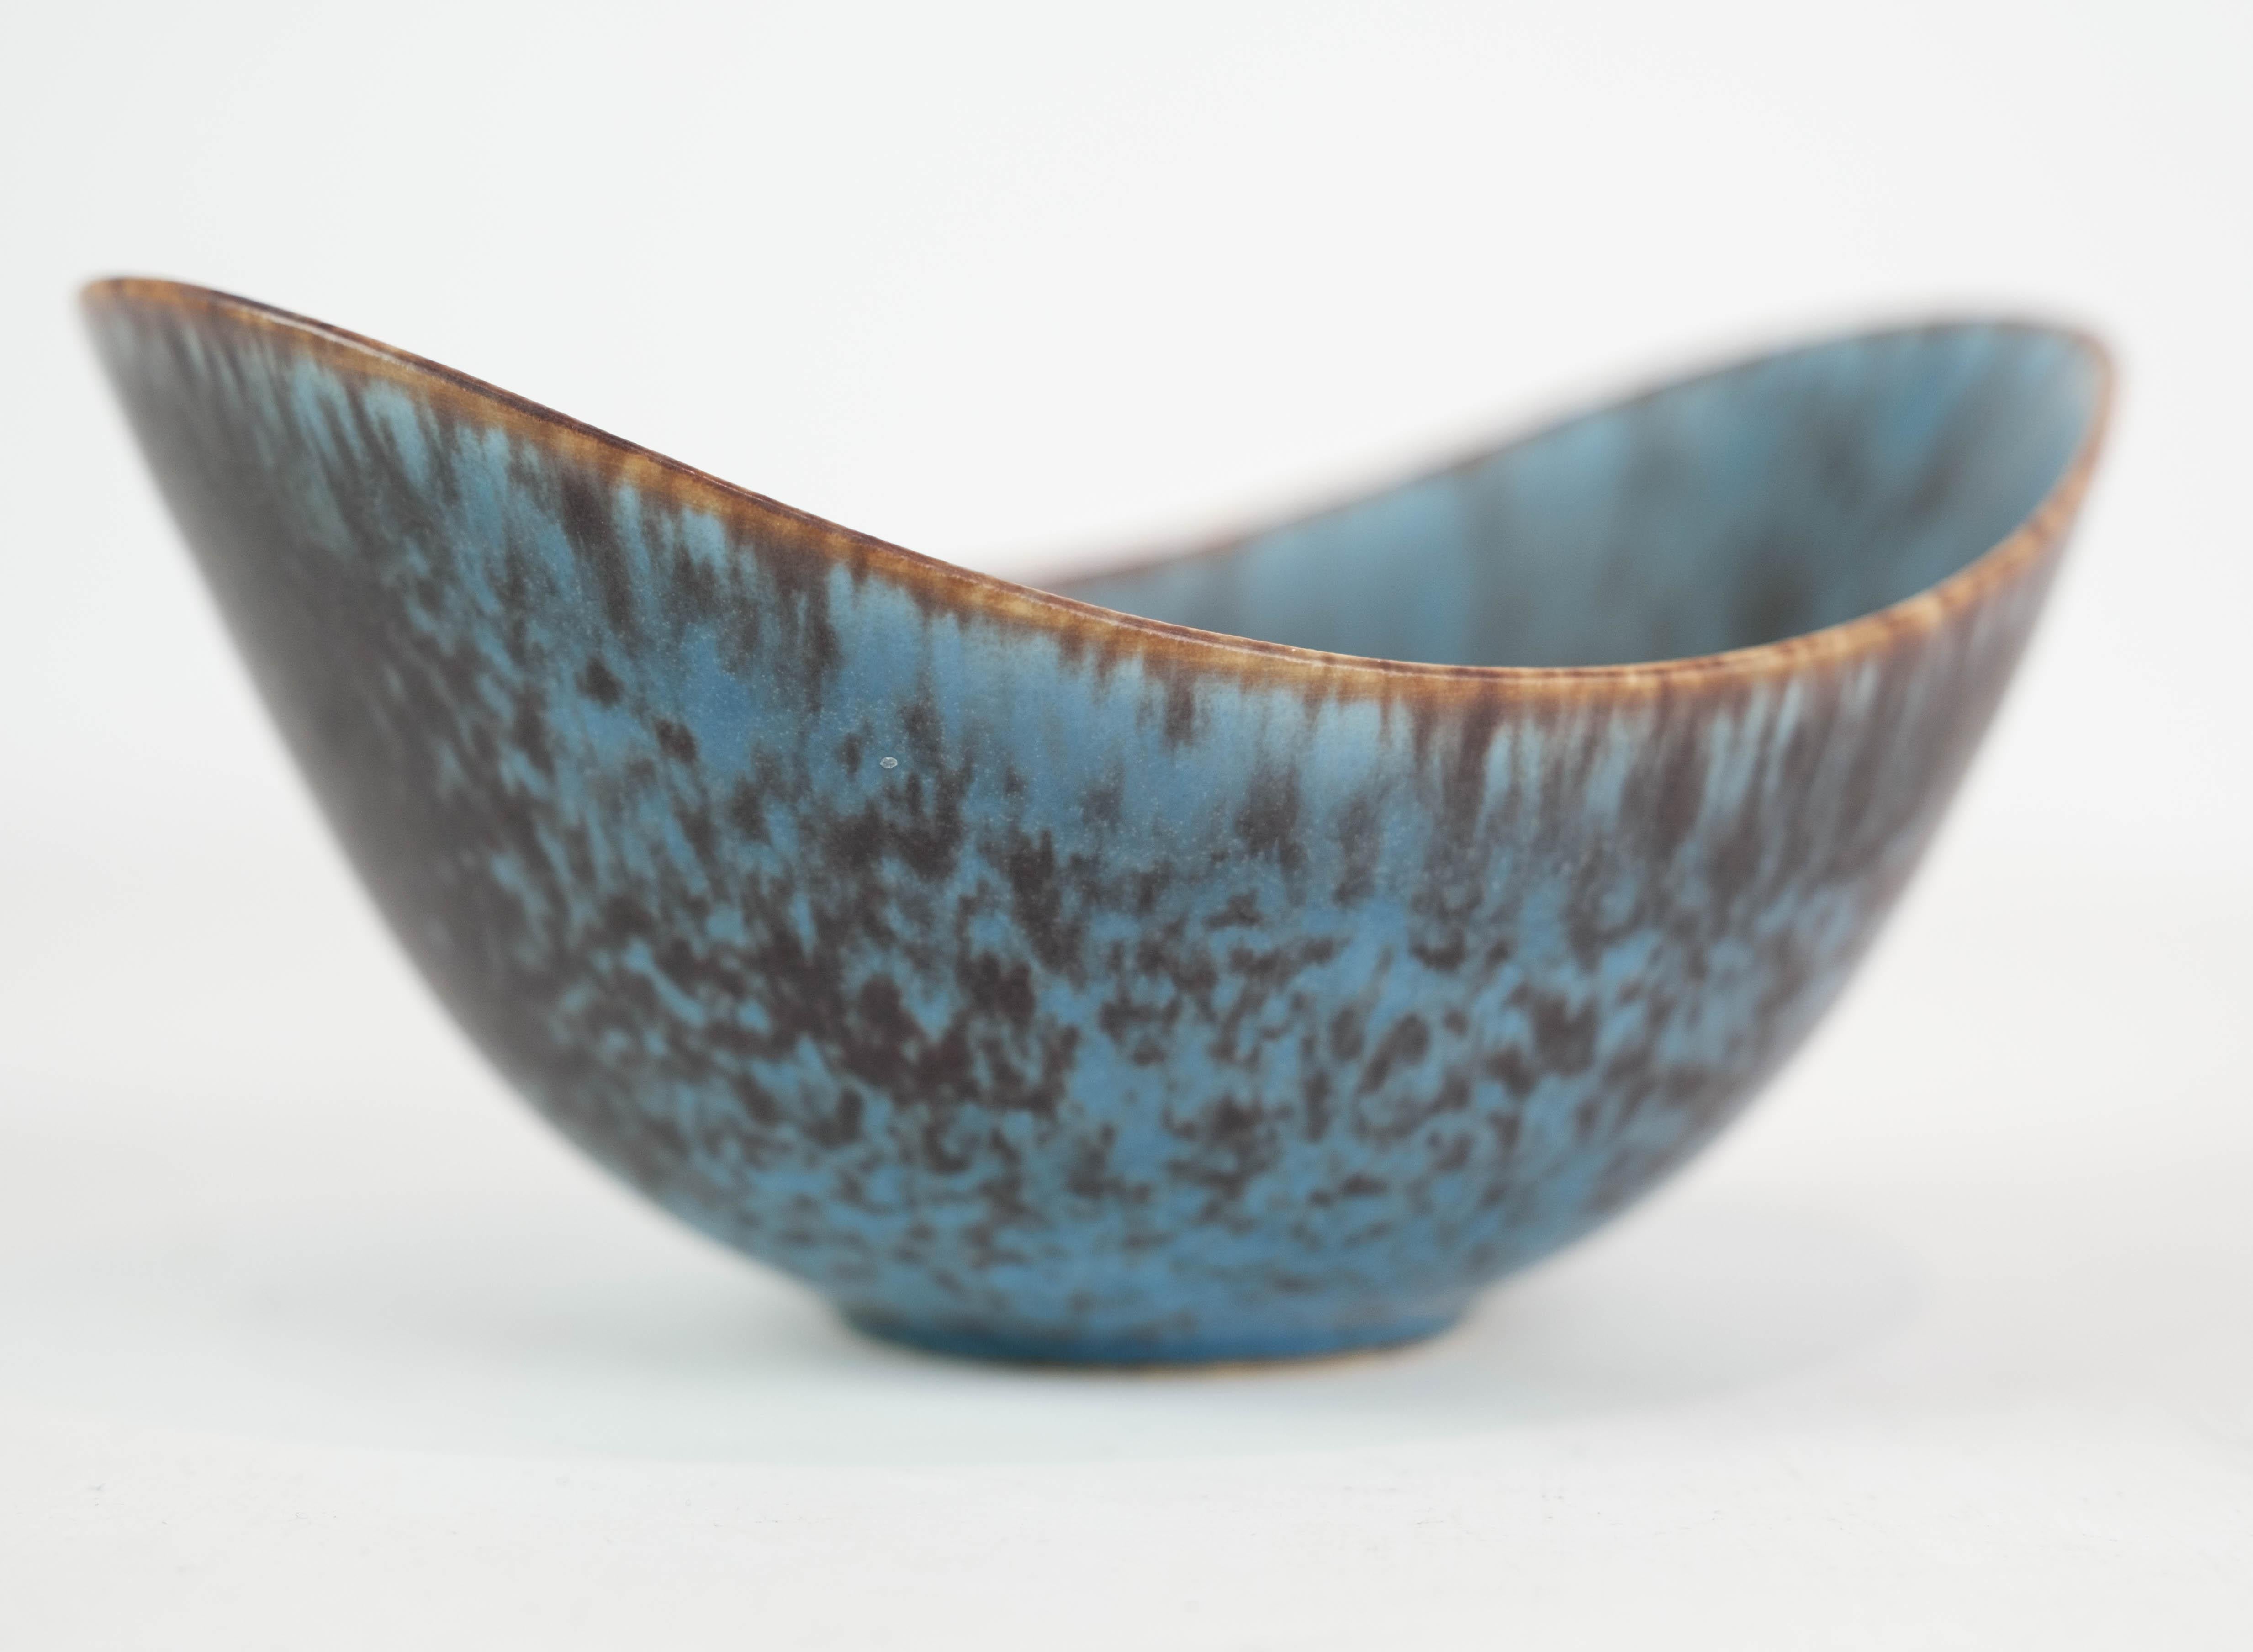 Mid-20th Century Ceramic Bowl with Blue and Brown Glace by the Artist Gunnar Nylund for Rørstrand